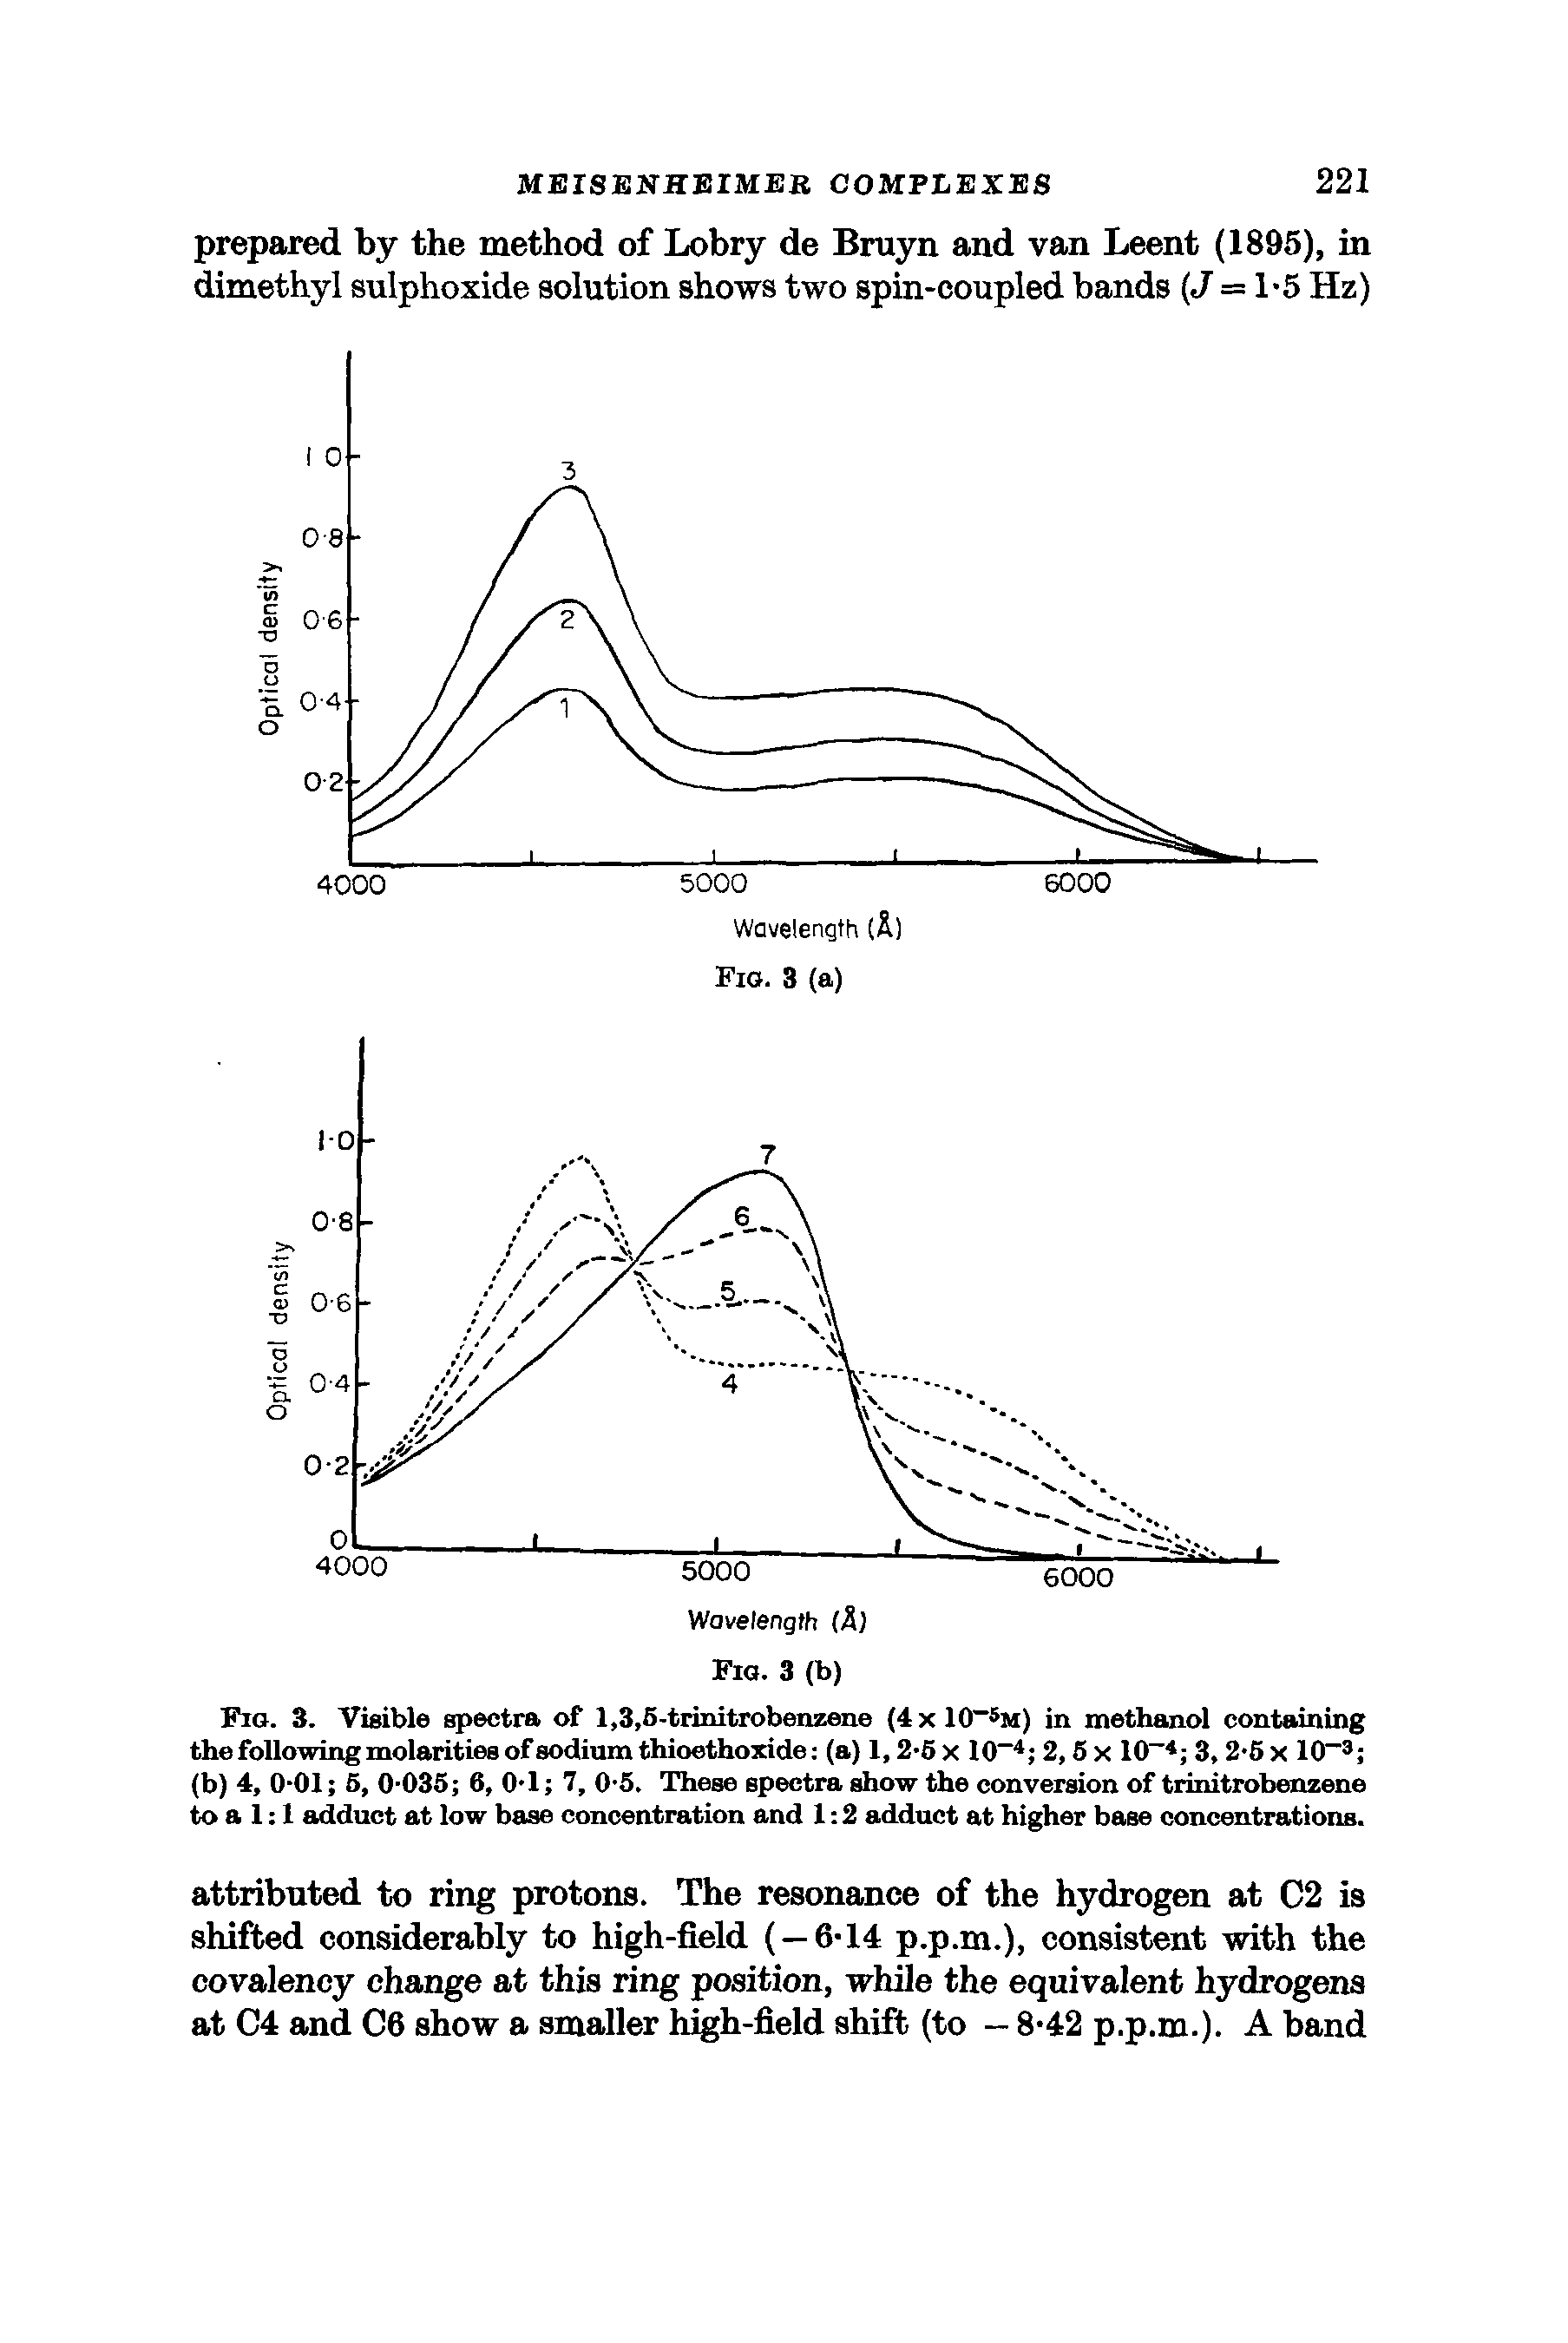 Fig. 3. Visible spectra of 1,3,5-trinitrobenzene (4 x 10-5m) in methanol containing the following molarities of sodium thioethoxide (a) 1,2-5 x 10-4 2,5 x 10-4 3, 2-5 x 10-3 (b) 4, 0-01 5, 0-035 6, 0-1 7, 0-5. These spectra show the conversion of trinitrobenzene to a 1 1 adduct at low base concentration and 1 2 adduct at higher base concentrations.